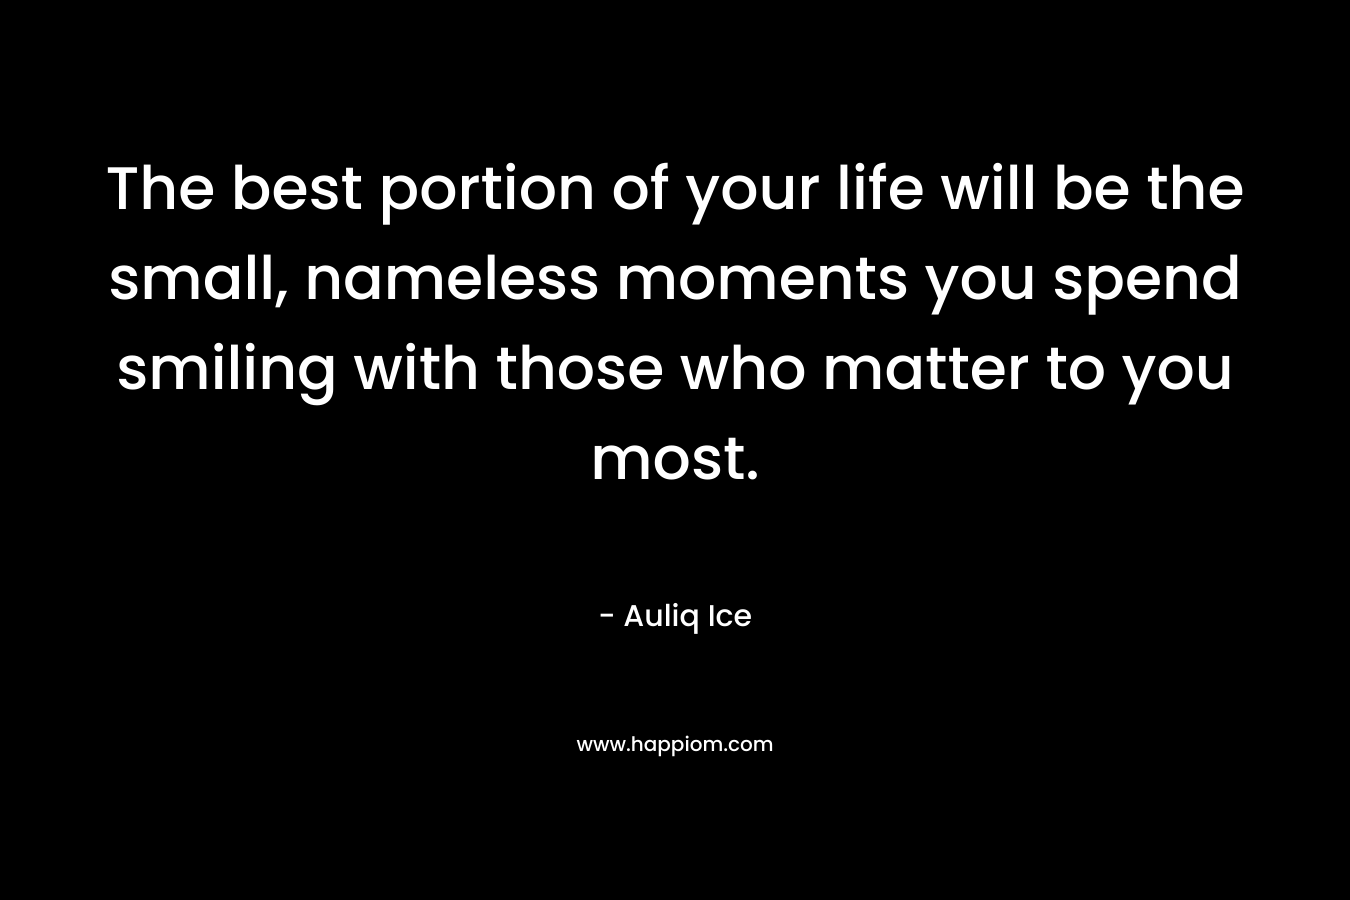 The best portion of your life will be the small, nameless moments you spend smiling with those who matter to you most. – Auliq Ice